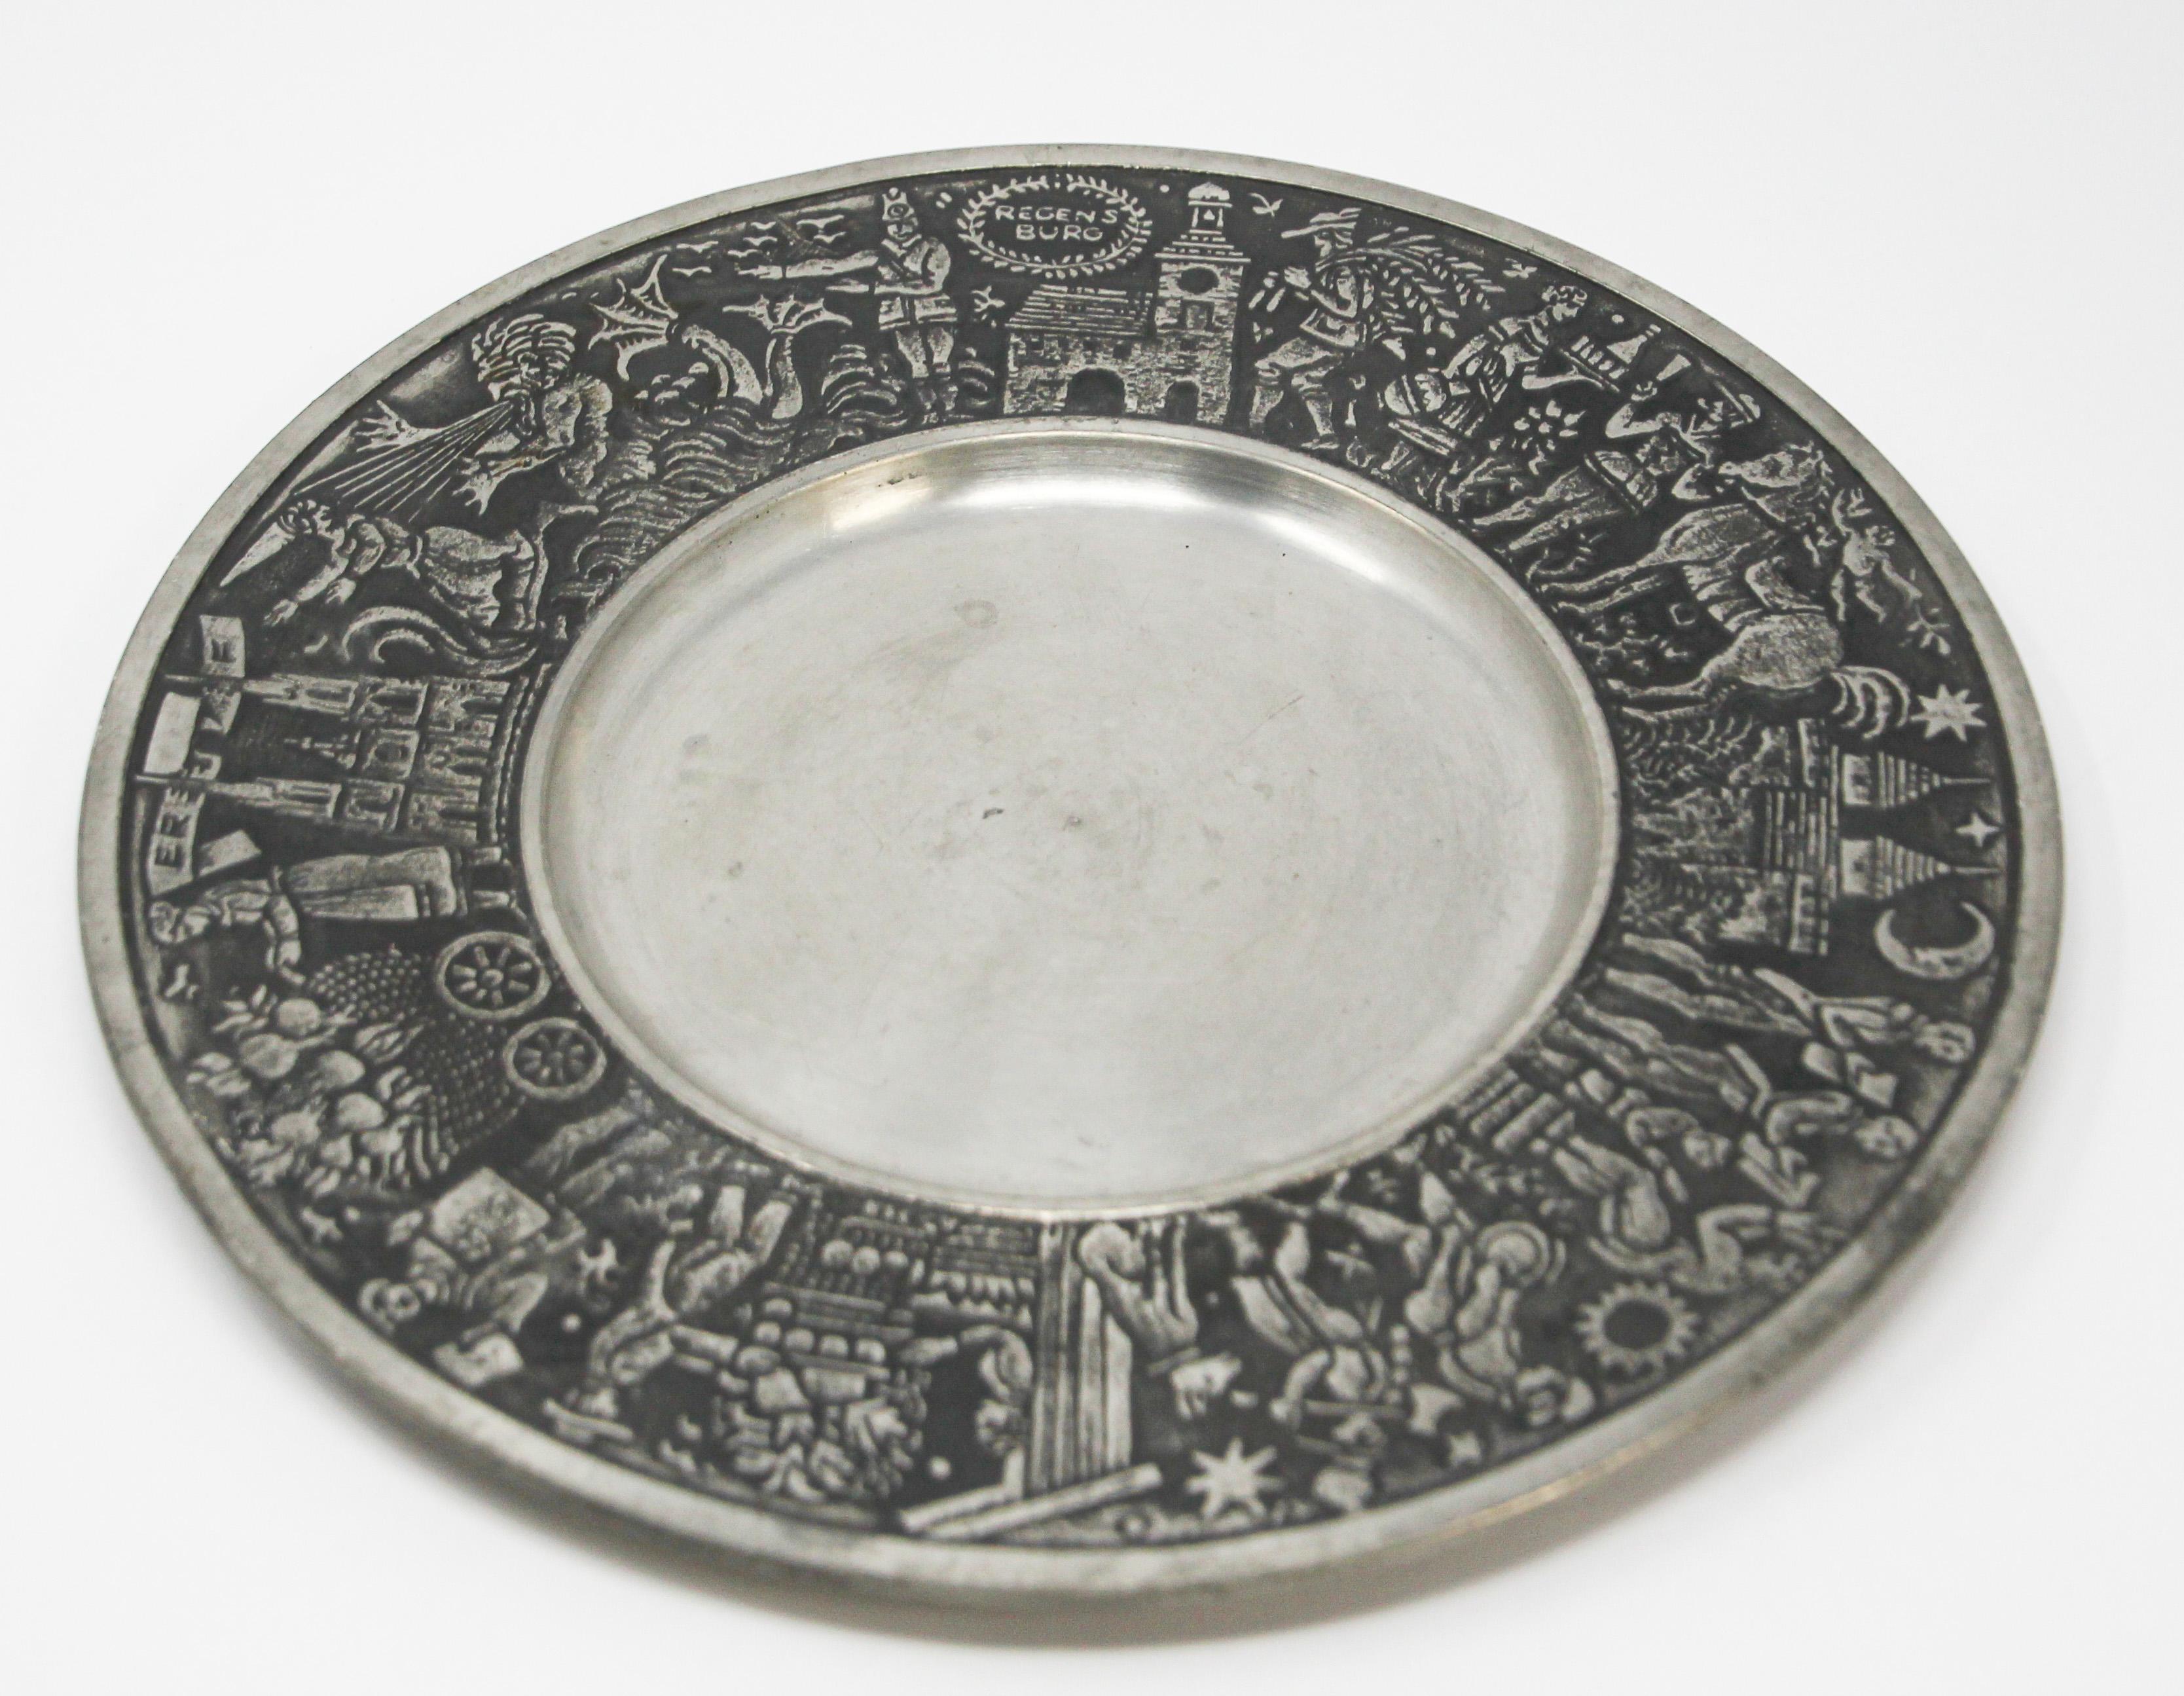 Heavy handcrafted metal pewter plate with design of scenes from early 20th century depicting the city life of Regensburg in Germany.
People, dog, horse, architectural buildings.
Handcrafted in West Germany relief decorative circular tray with